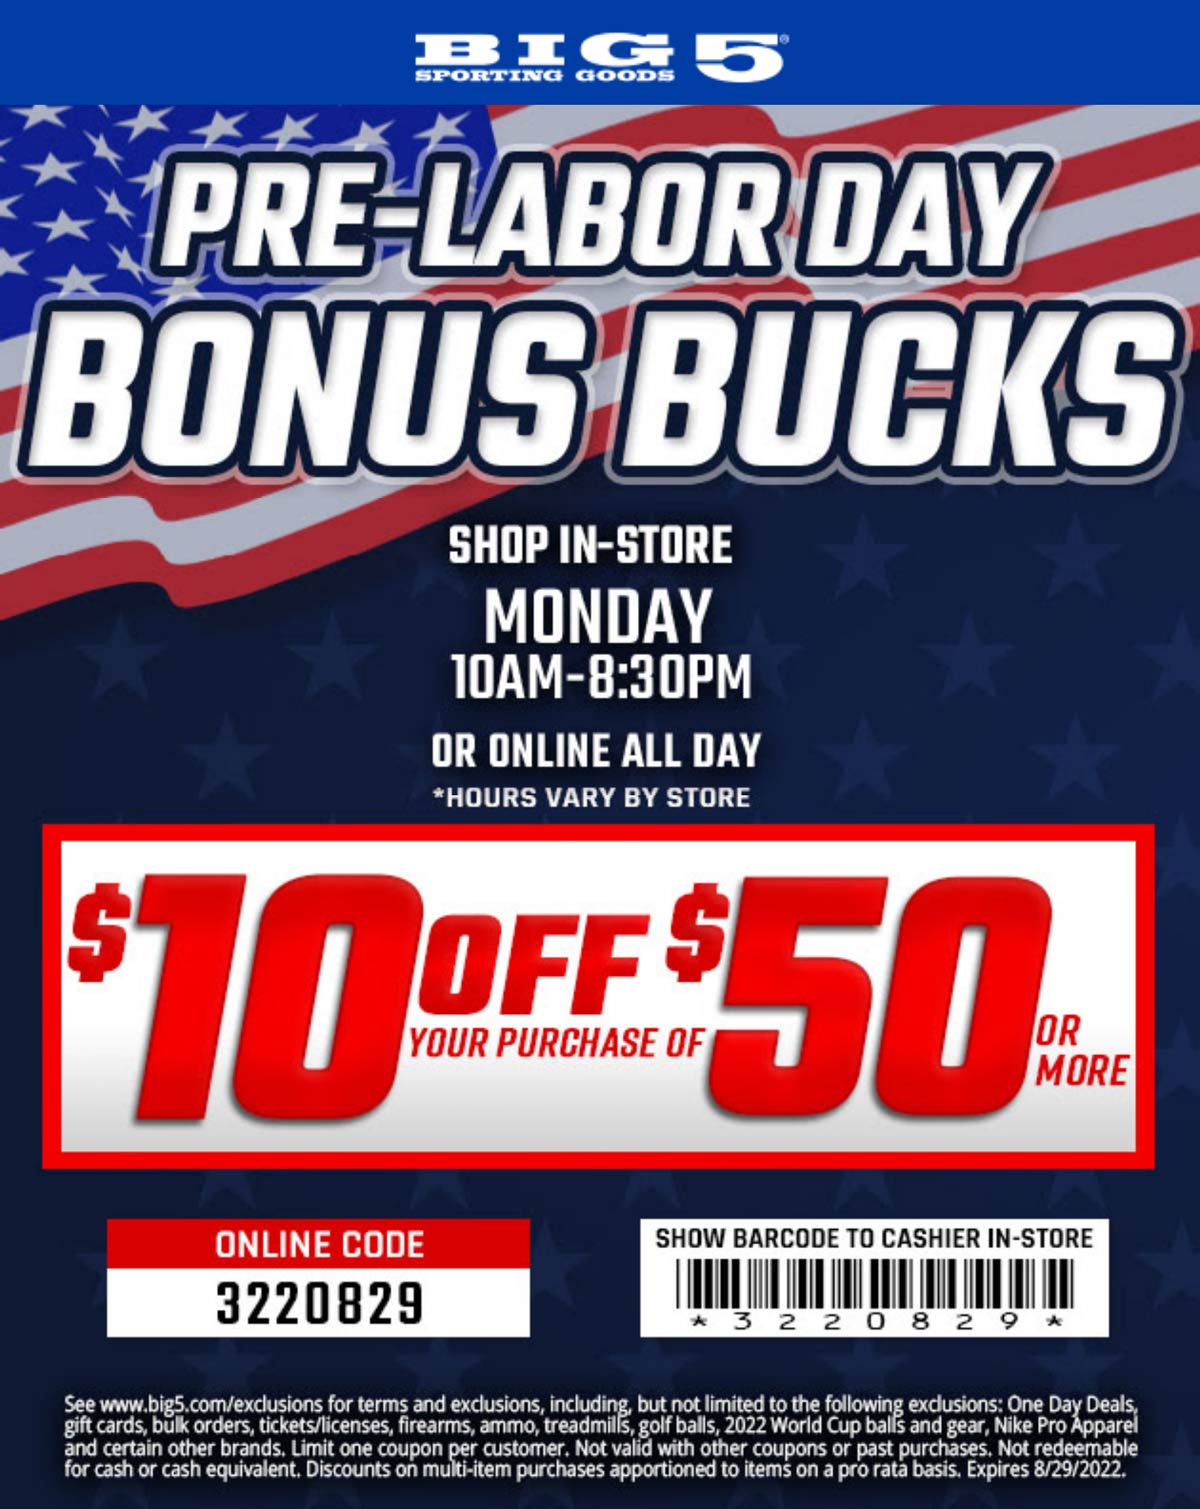 Big 5 stores Coupon  $10 off $50 today at Big 5 sporting goods, or online via promo code 3220829 #big5 